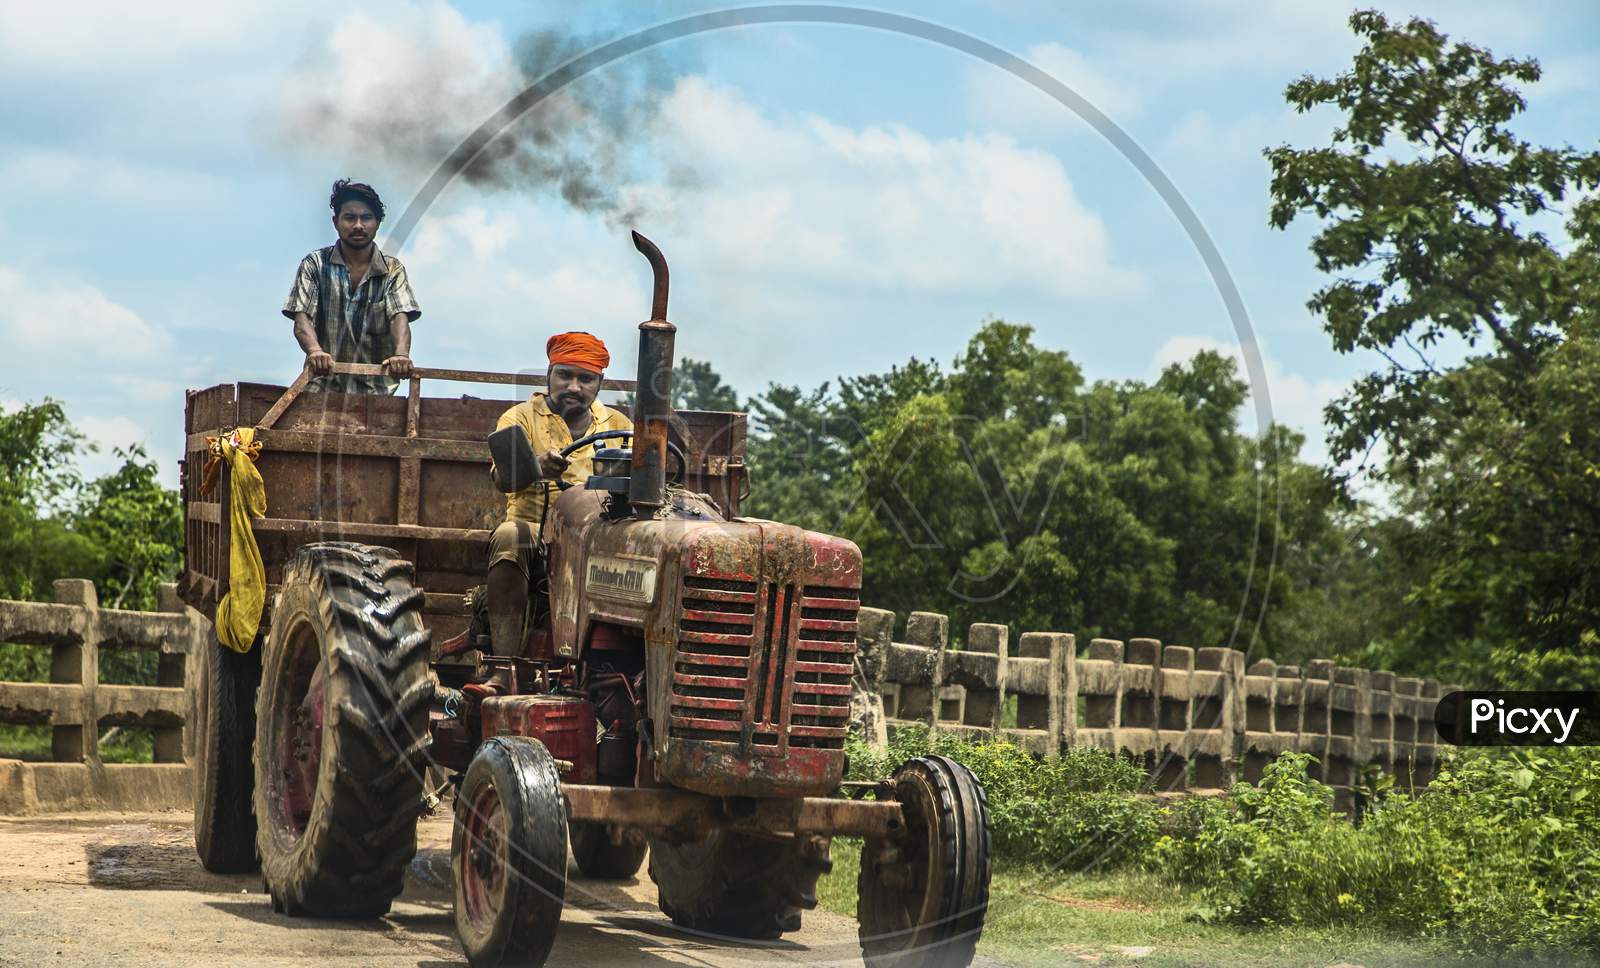 An Indian driving tractor